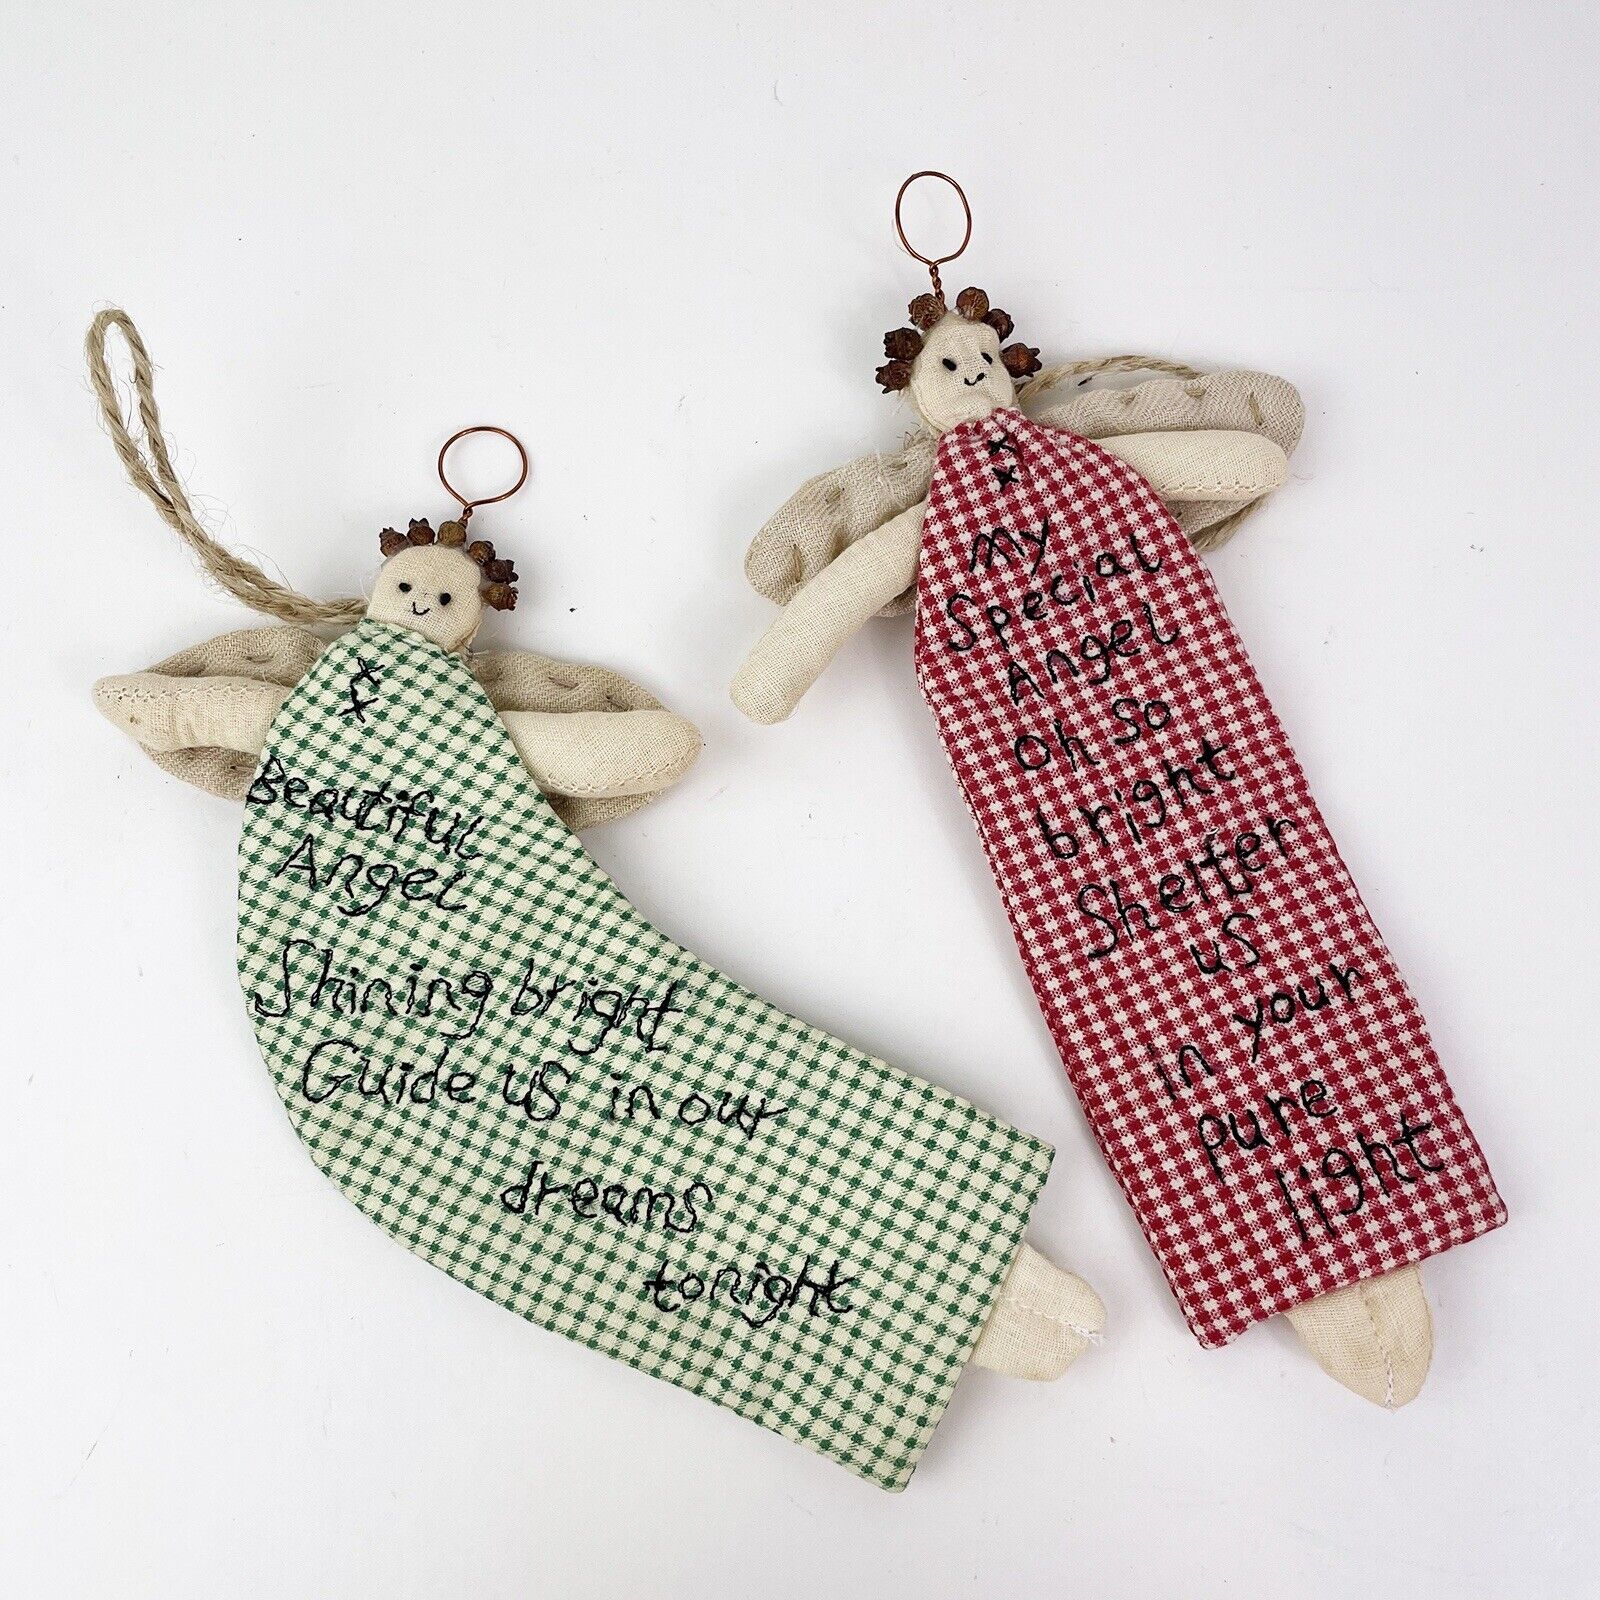 2 Vintage Cute Handmade Cloth Angel Ornaments With Hand Sewing Sayings